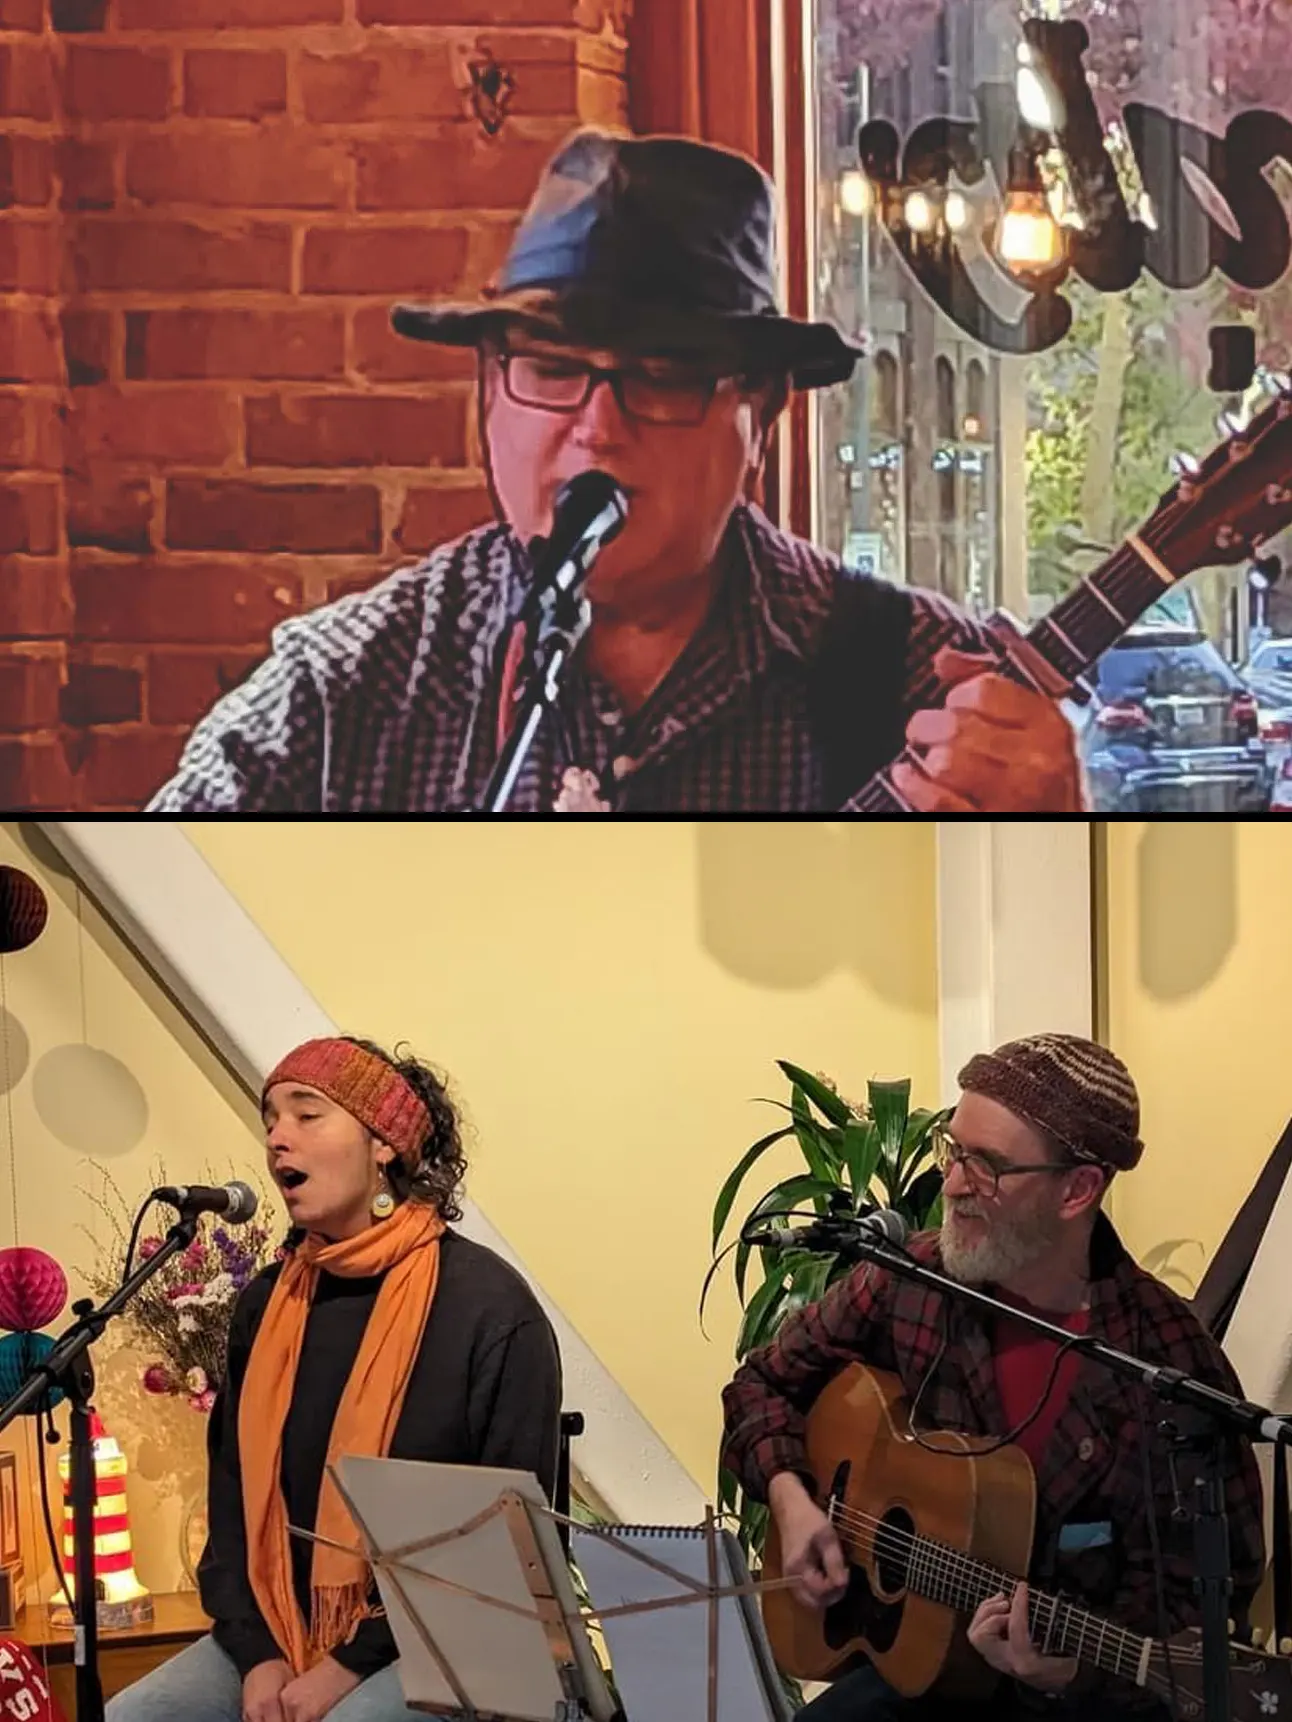 A collage of singer-songwriters all playing guitars and singing into microphones.